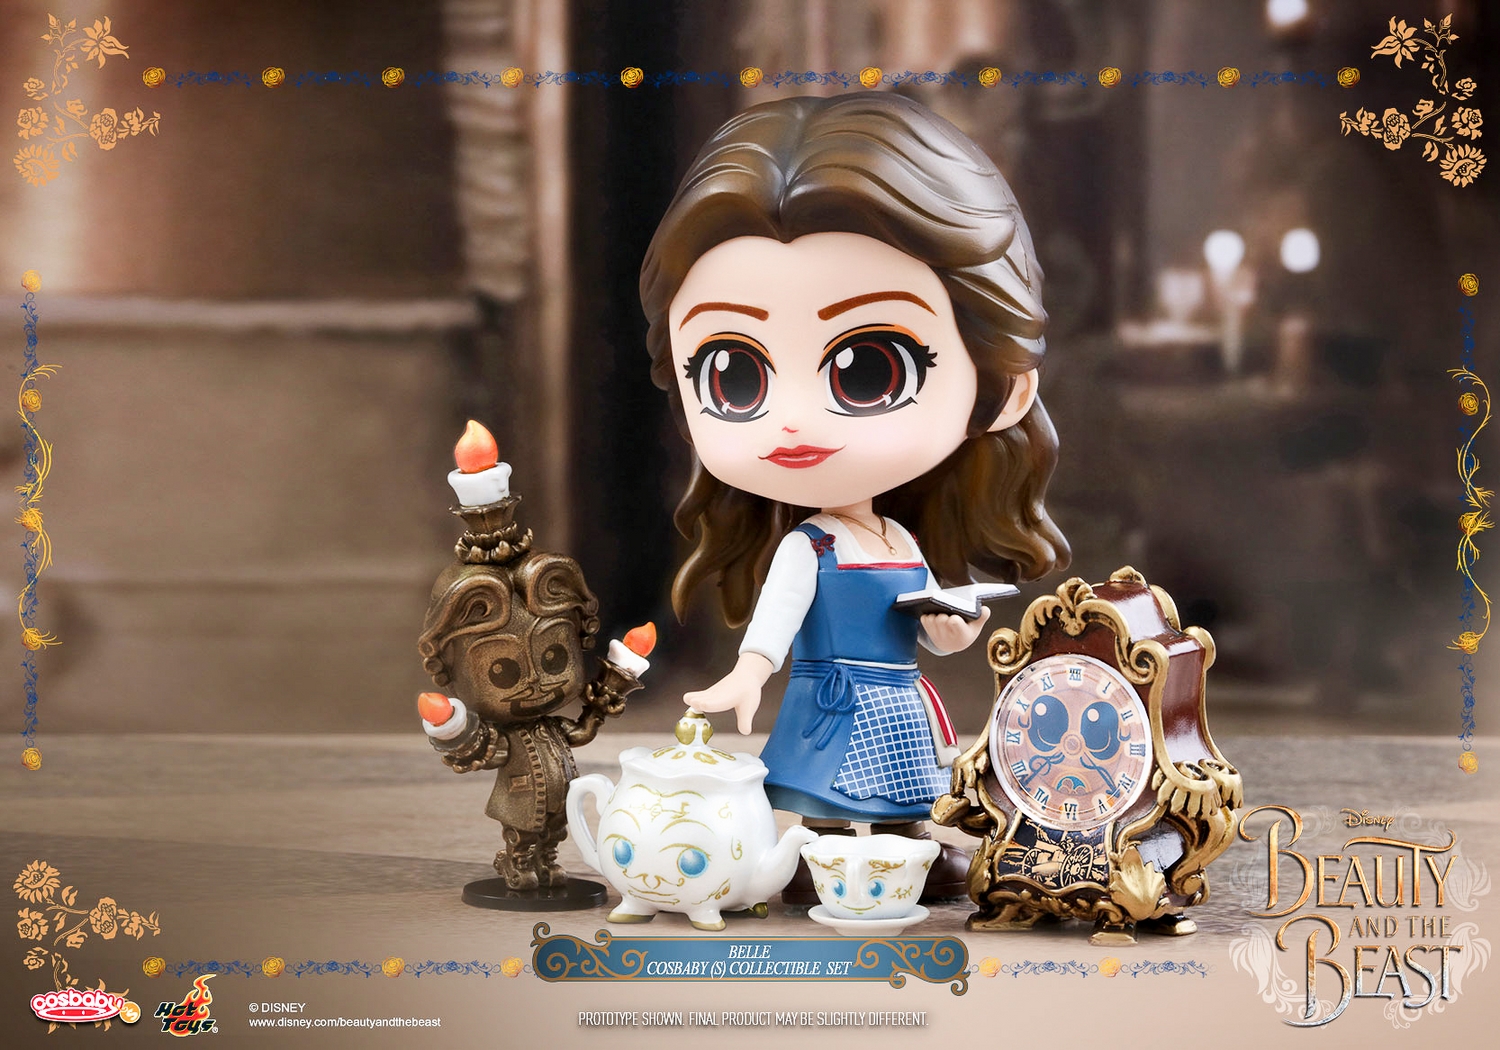 Hot-Toys-COSB352-353-Beauty-and-the-Beast-Cosbaby-013.jpg